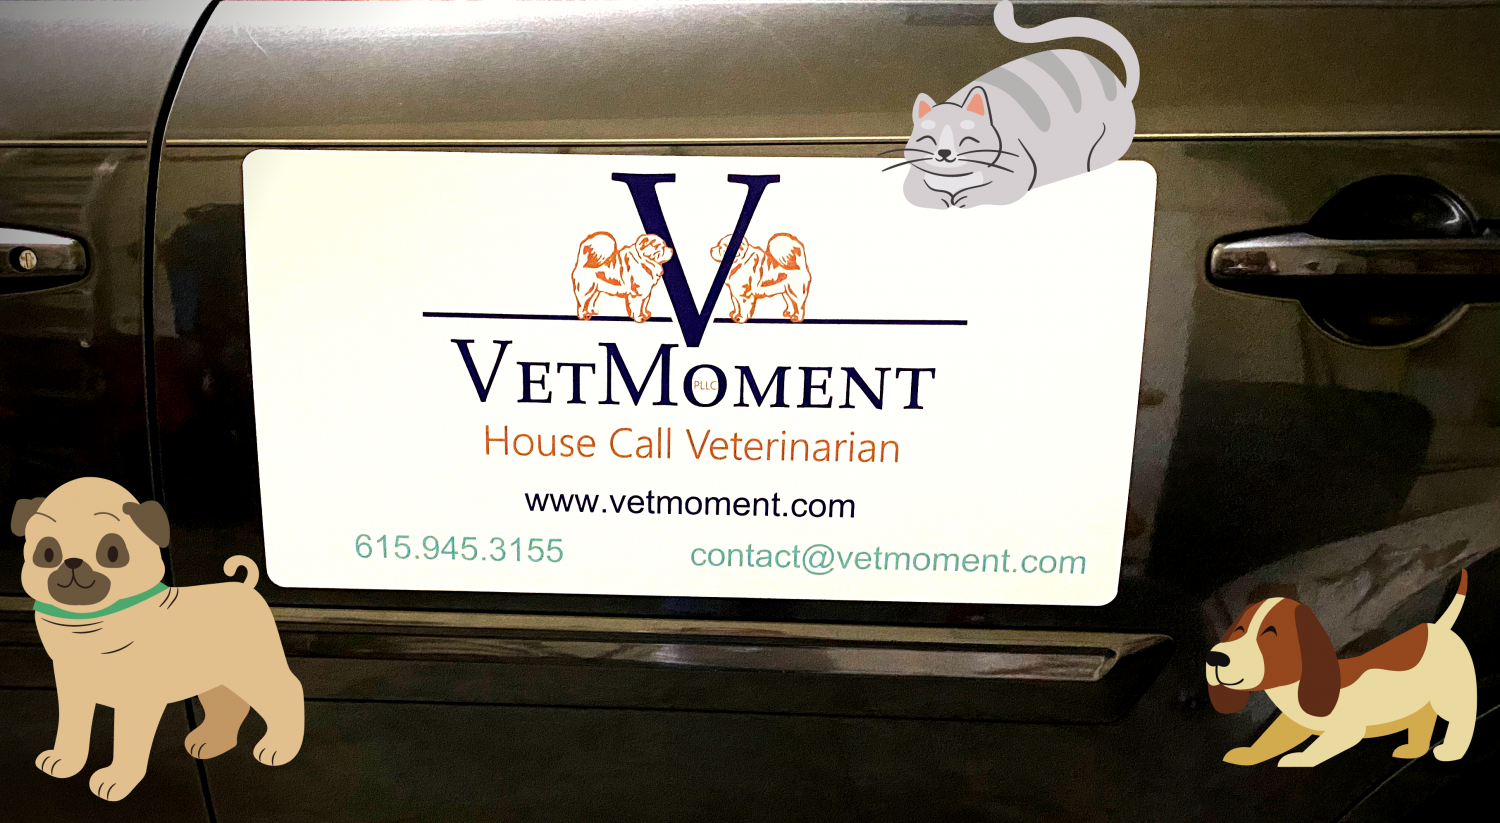 VetMoment House Call Veterinarian - We service the communities of  Franklin, Brentwood, Thompson Station, Spring Hill, Leiper's Fork, South Nashville and the greater Williamson County area.